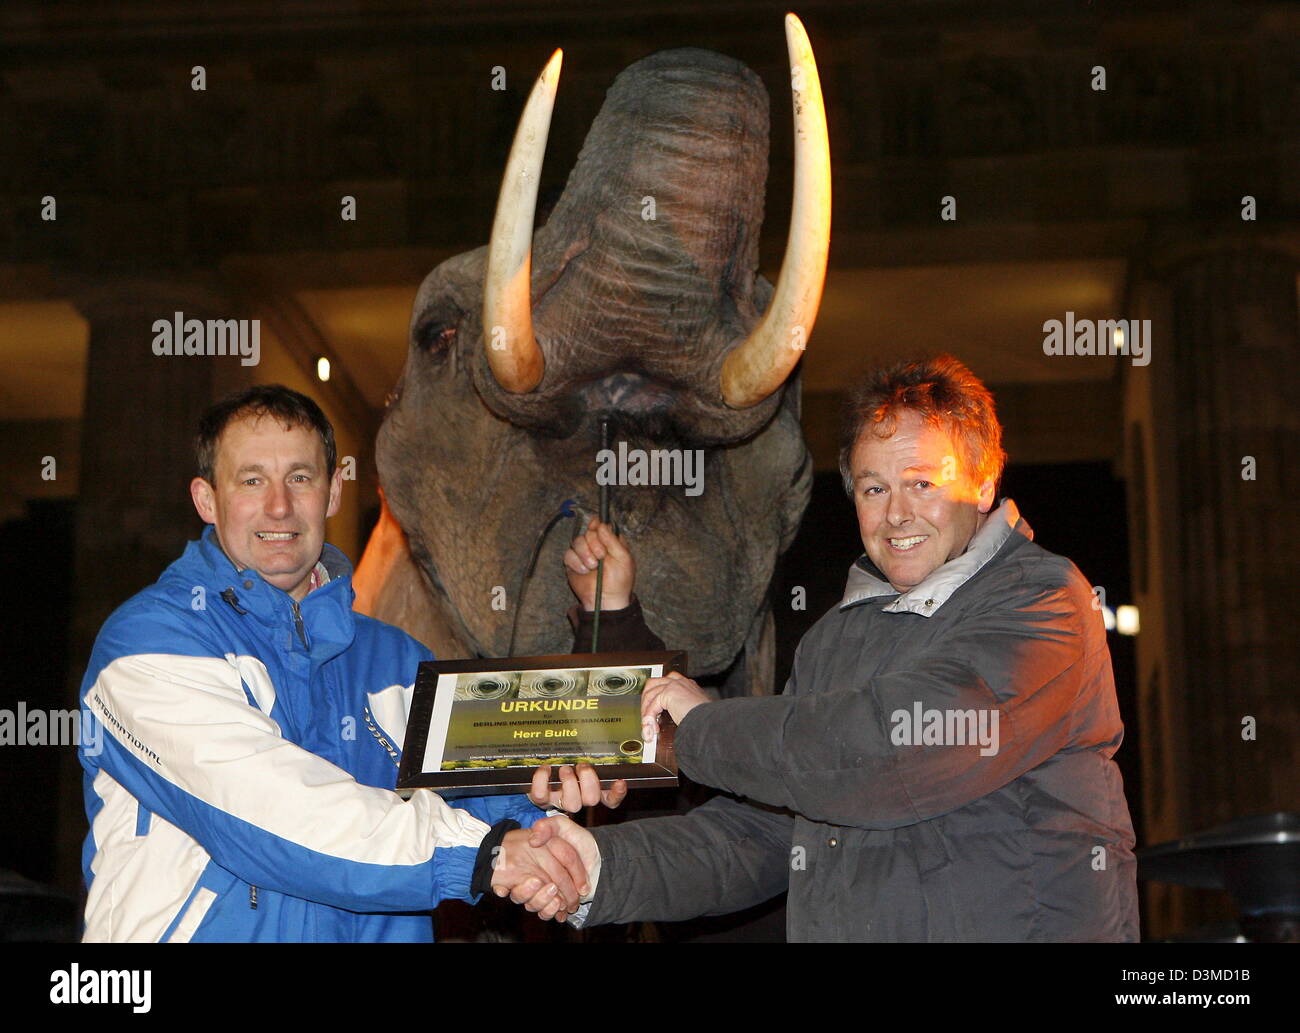 Dutch authors Salem Smhoud (L) and Hans van der Loo award each other a certificate, while elephant Marla is watching their backs in front of Brandenburger Gate in Berlin, Germany, Thursday 02 February 2006. The authors have written the book 'Lust und Leistung' (joy and performance) about business managers in which they call them 'Memofanten' (short for memory elephants). Since no B Stock Photo